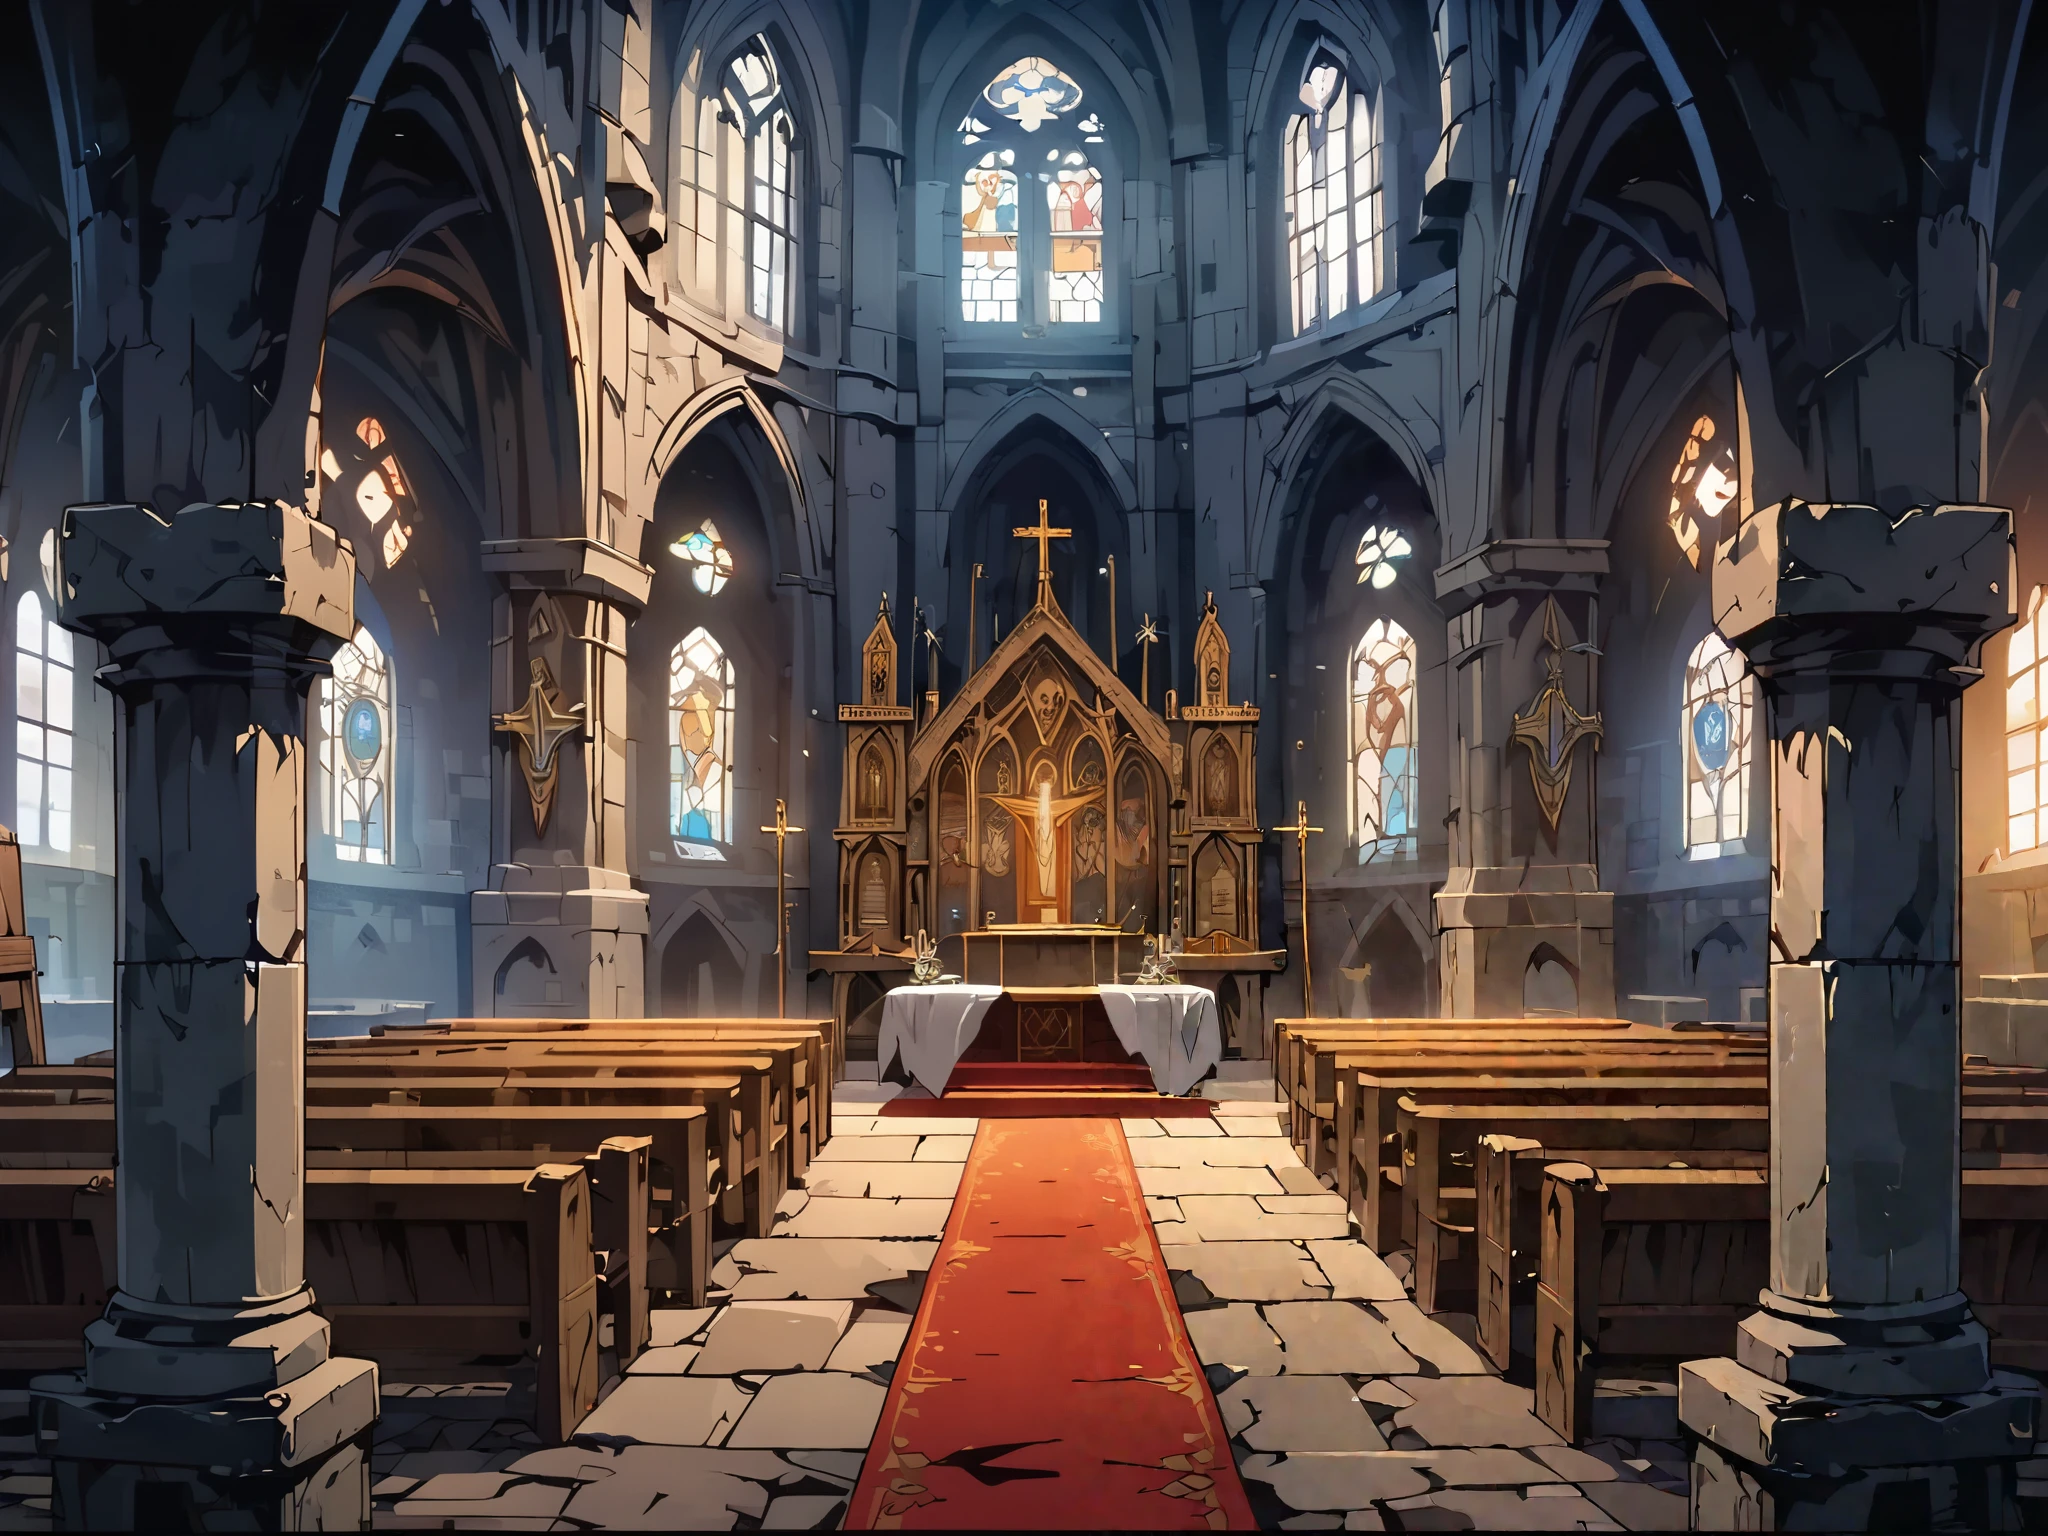 church(Medieval Church of Europe)，White Wall，Sacred and solemn environment，There is a red carpet in the middle，The seats on both sides were filled with believers praying。Mid-ground composition，Panorama pictures，Scene screen，Game concept art style，Anime illustration style，HD，4K。